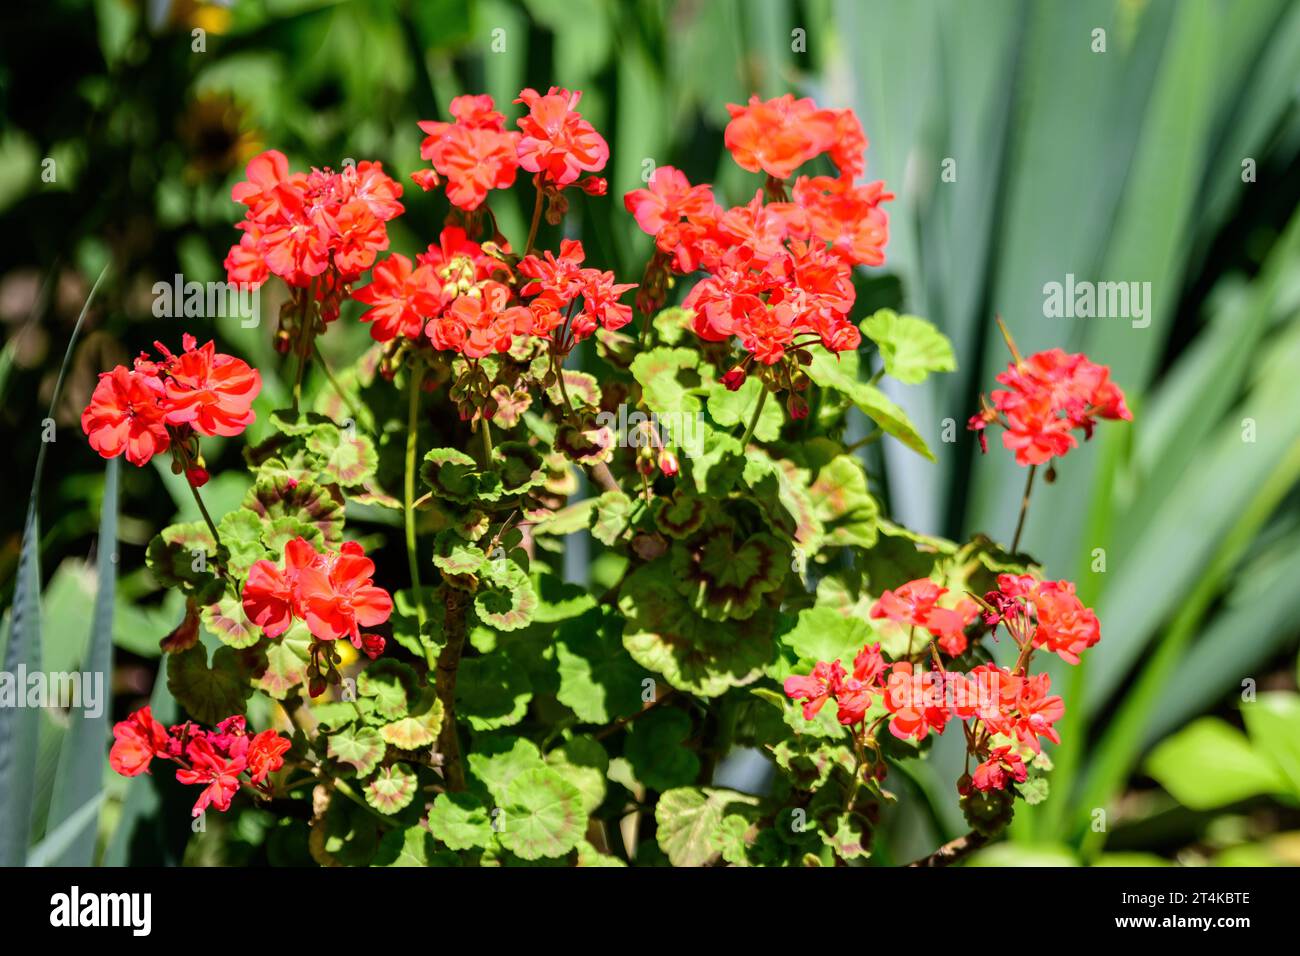 Group of vivid red Pelargonium flowers (commonly known as geraniums, pelargoniums or storksbills) and fresh green leaves in a pot in a garden in a sun Stock Photo